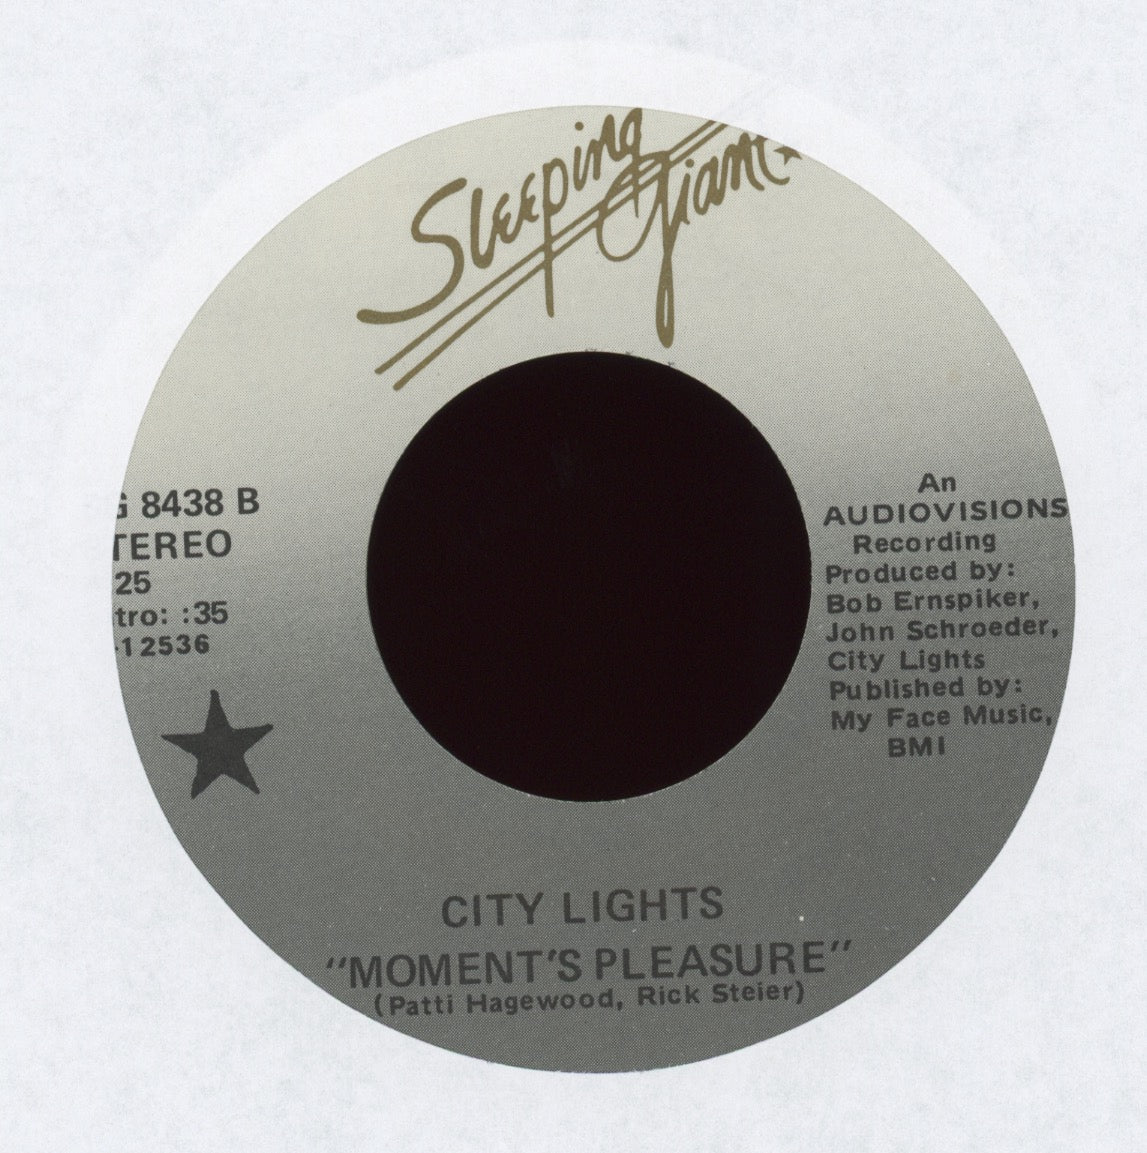 City Lights - Hold My Own on Sleeping Giant